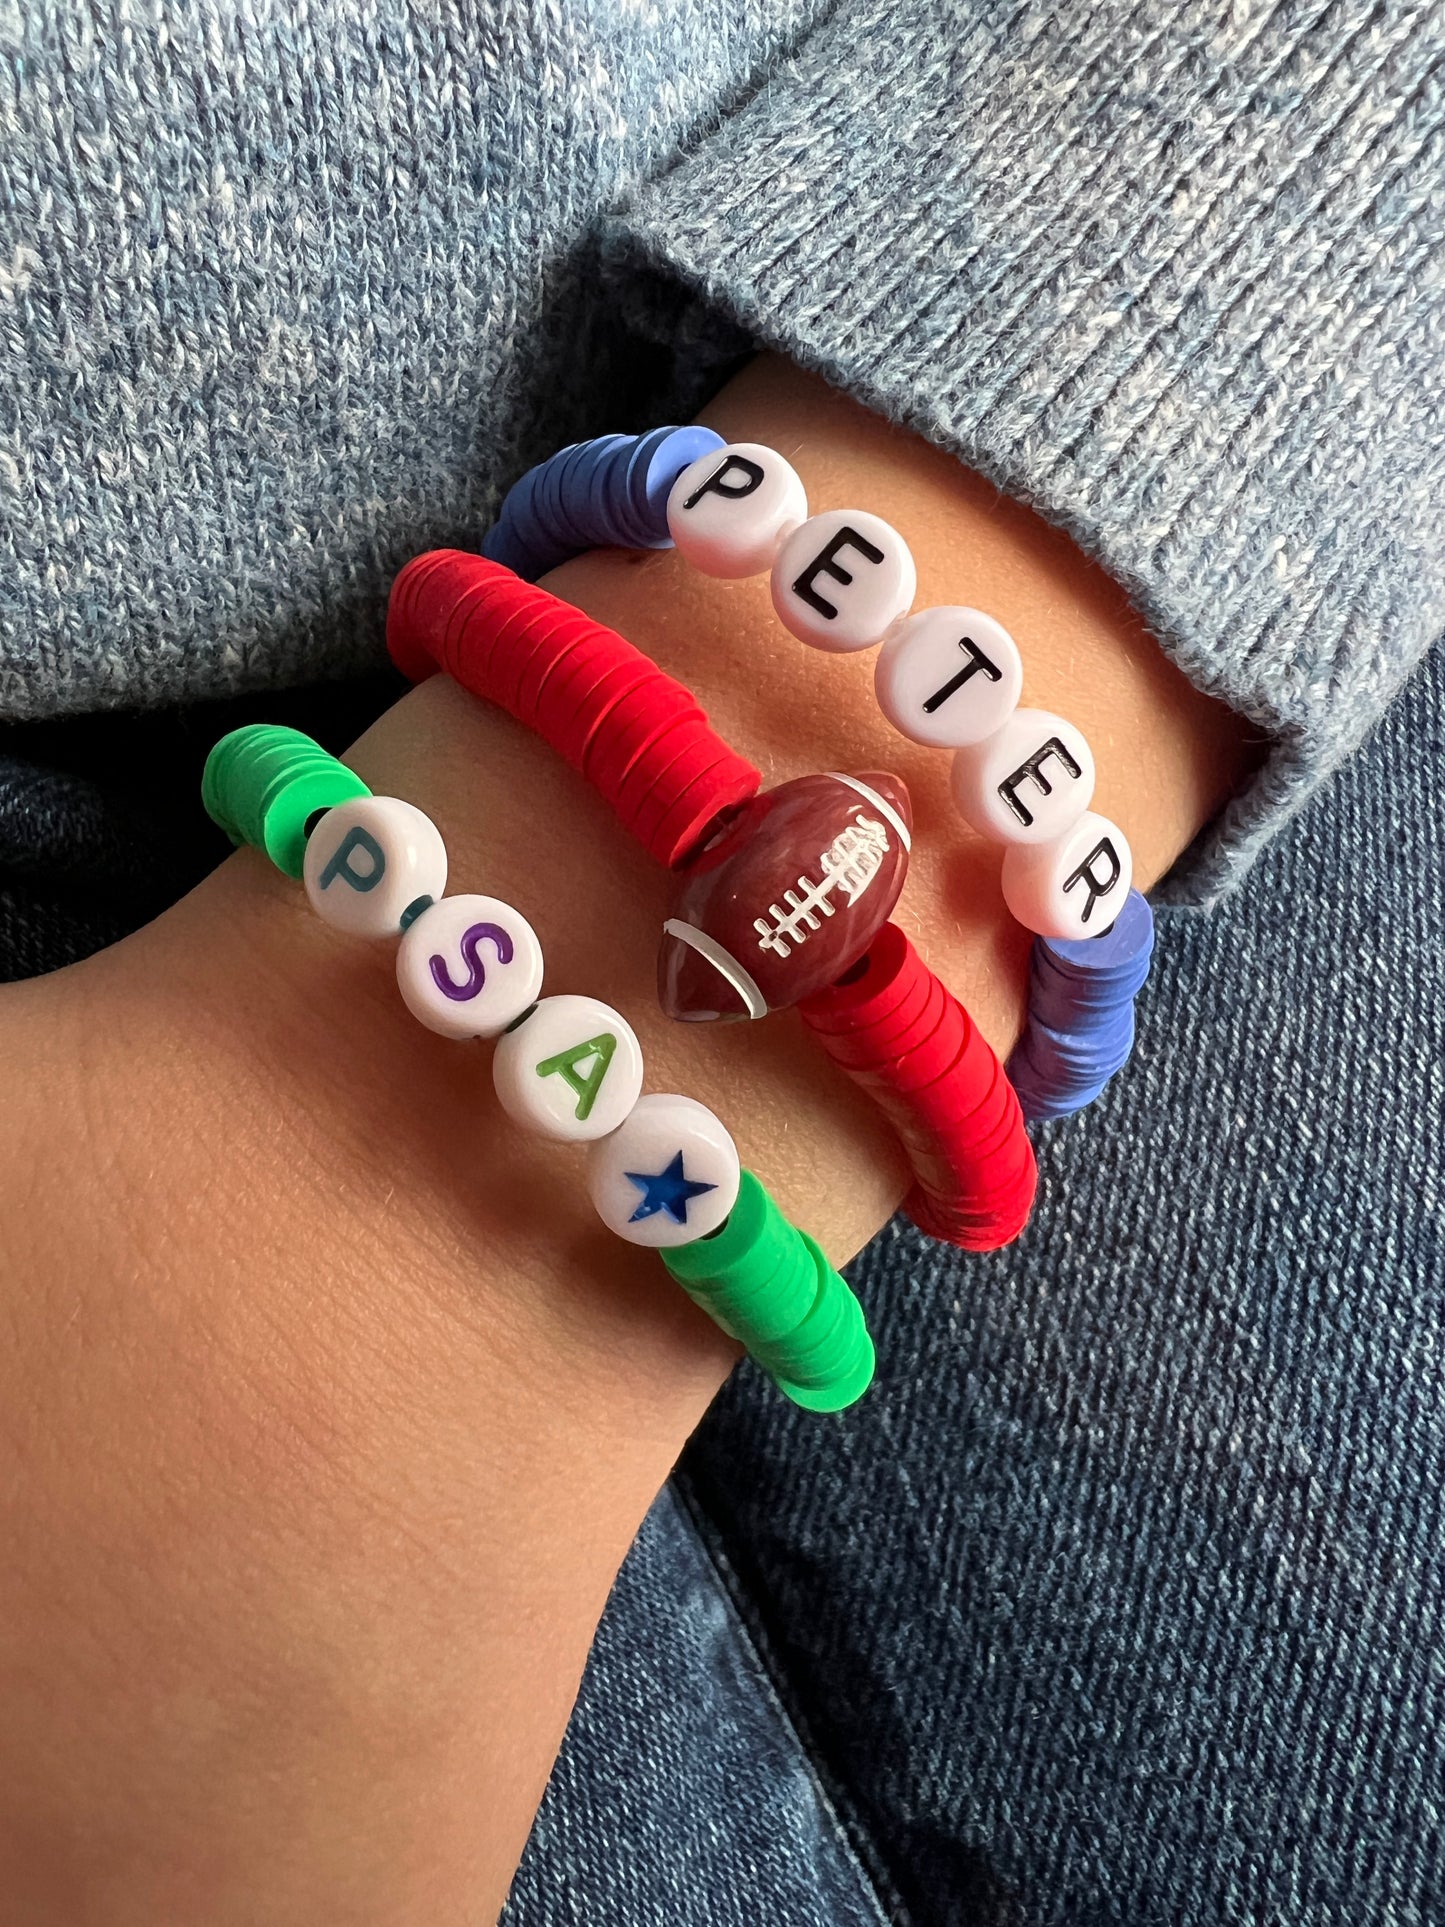 The Peter | Personalized Accent Bead Kid's Bracelet